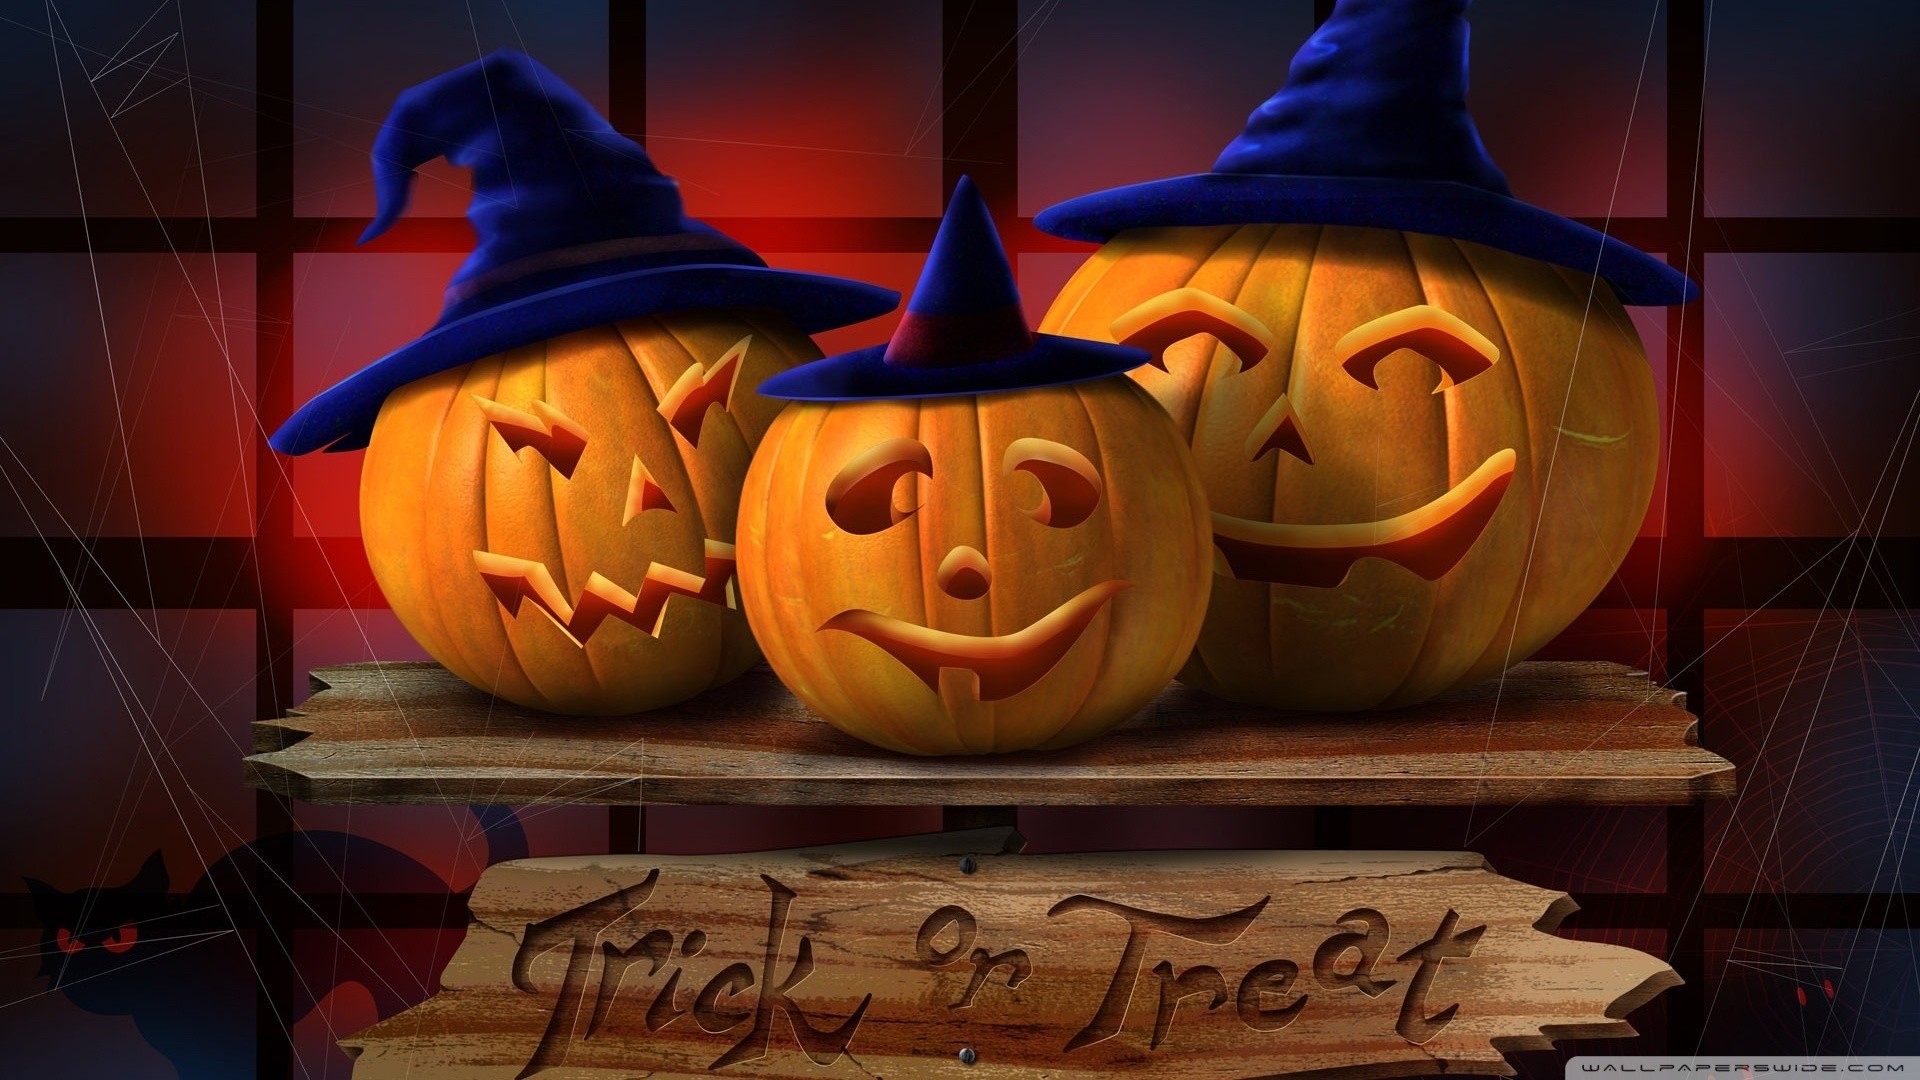 Trick or Treat Wallpaper (62+ pictures)